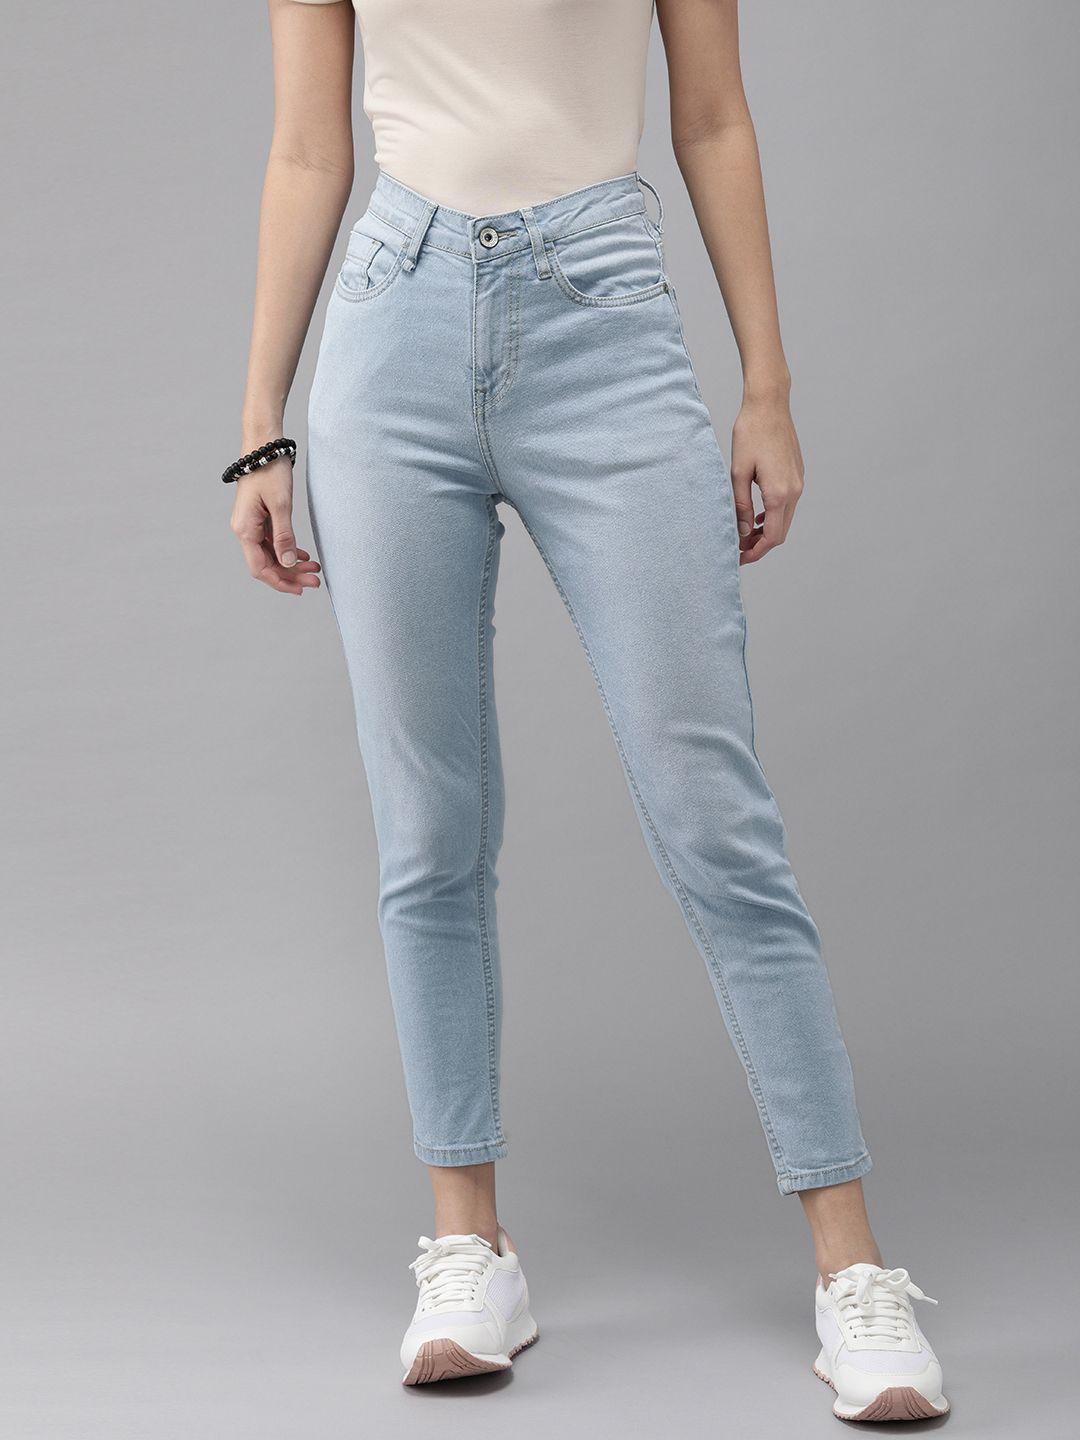 roadster-women-blue-skinny-fit-high-rise-clean-look-stretchable-jeans